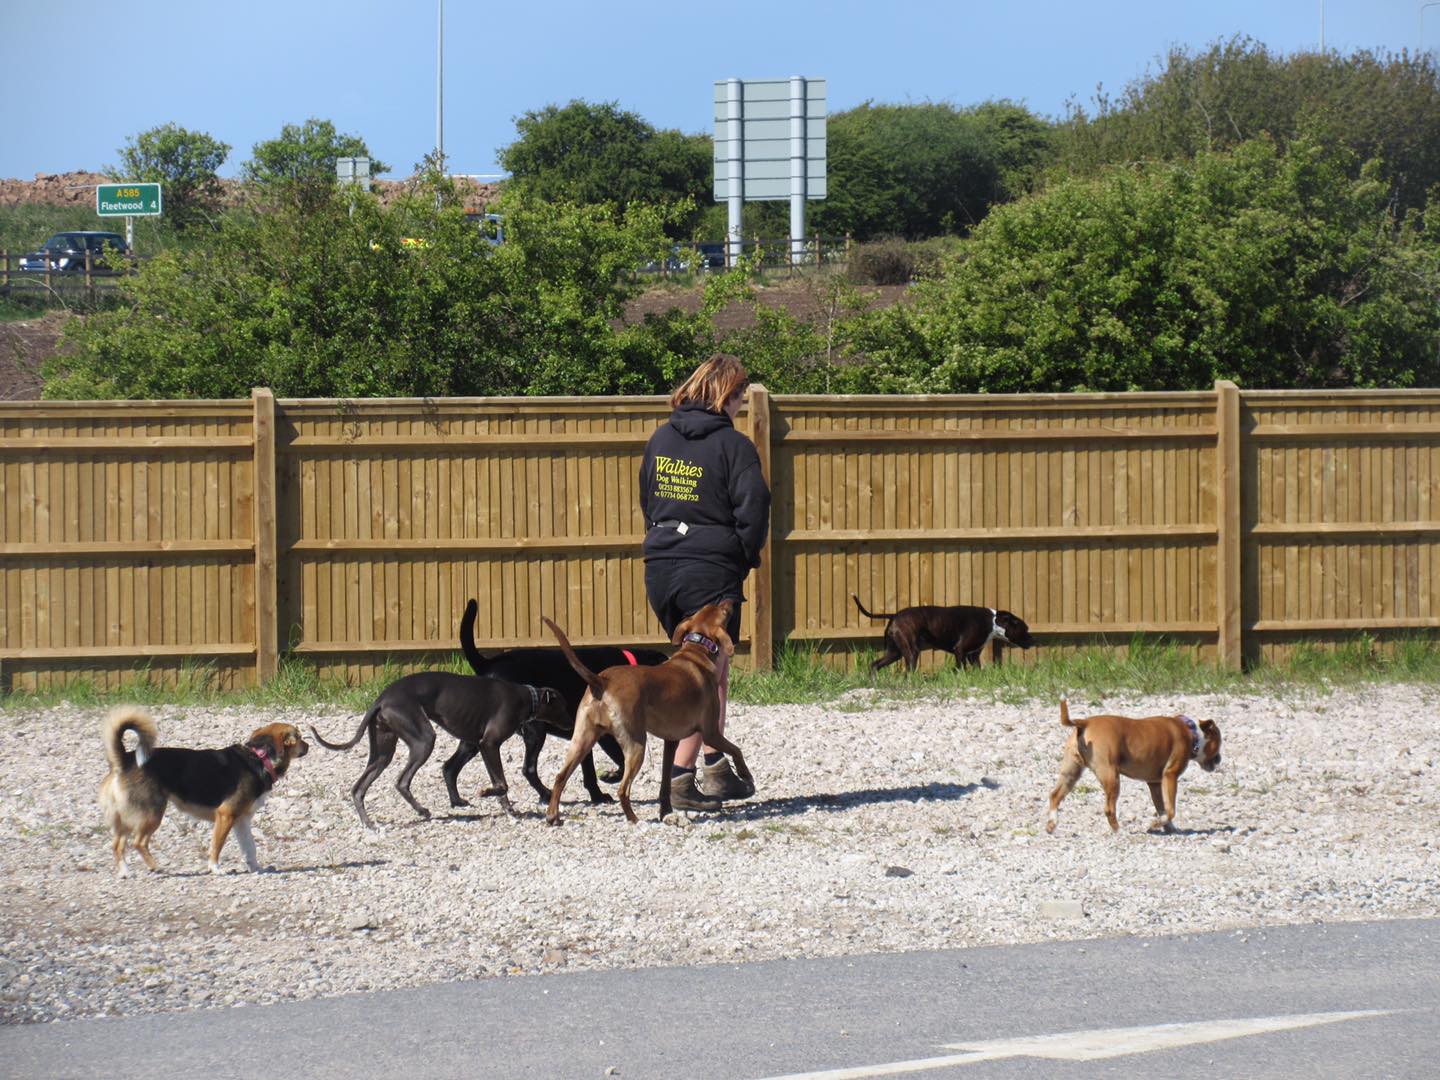 Wendy from Walkies Blackpool on a group dog walk surrounded by dogs.